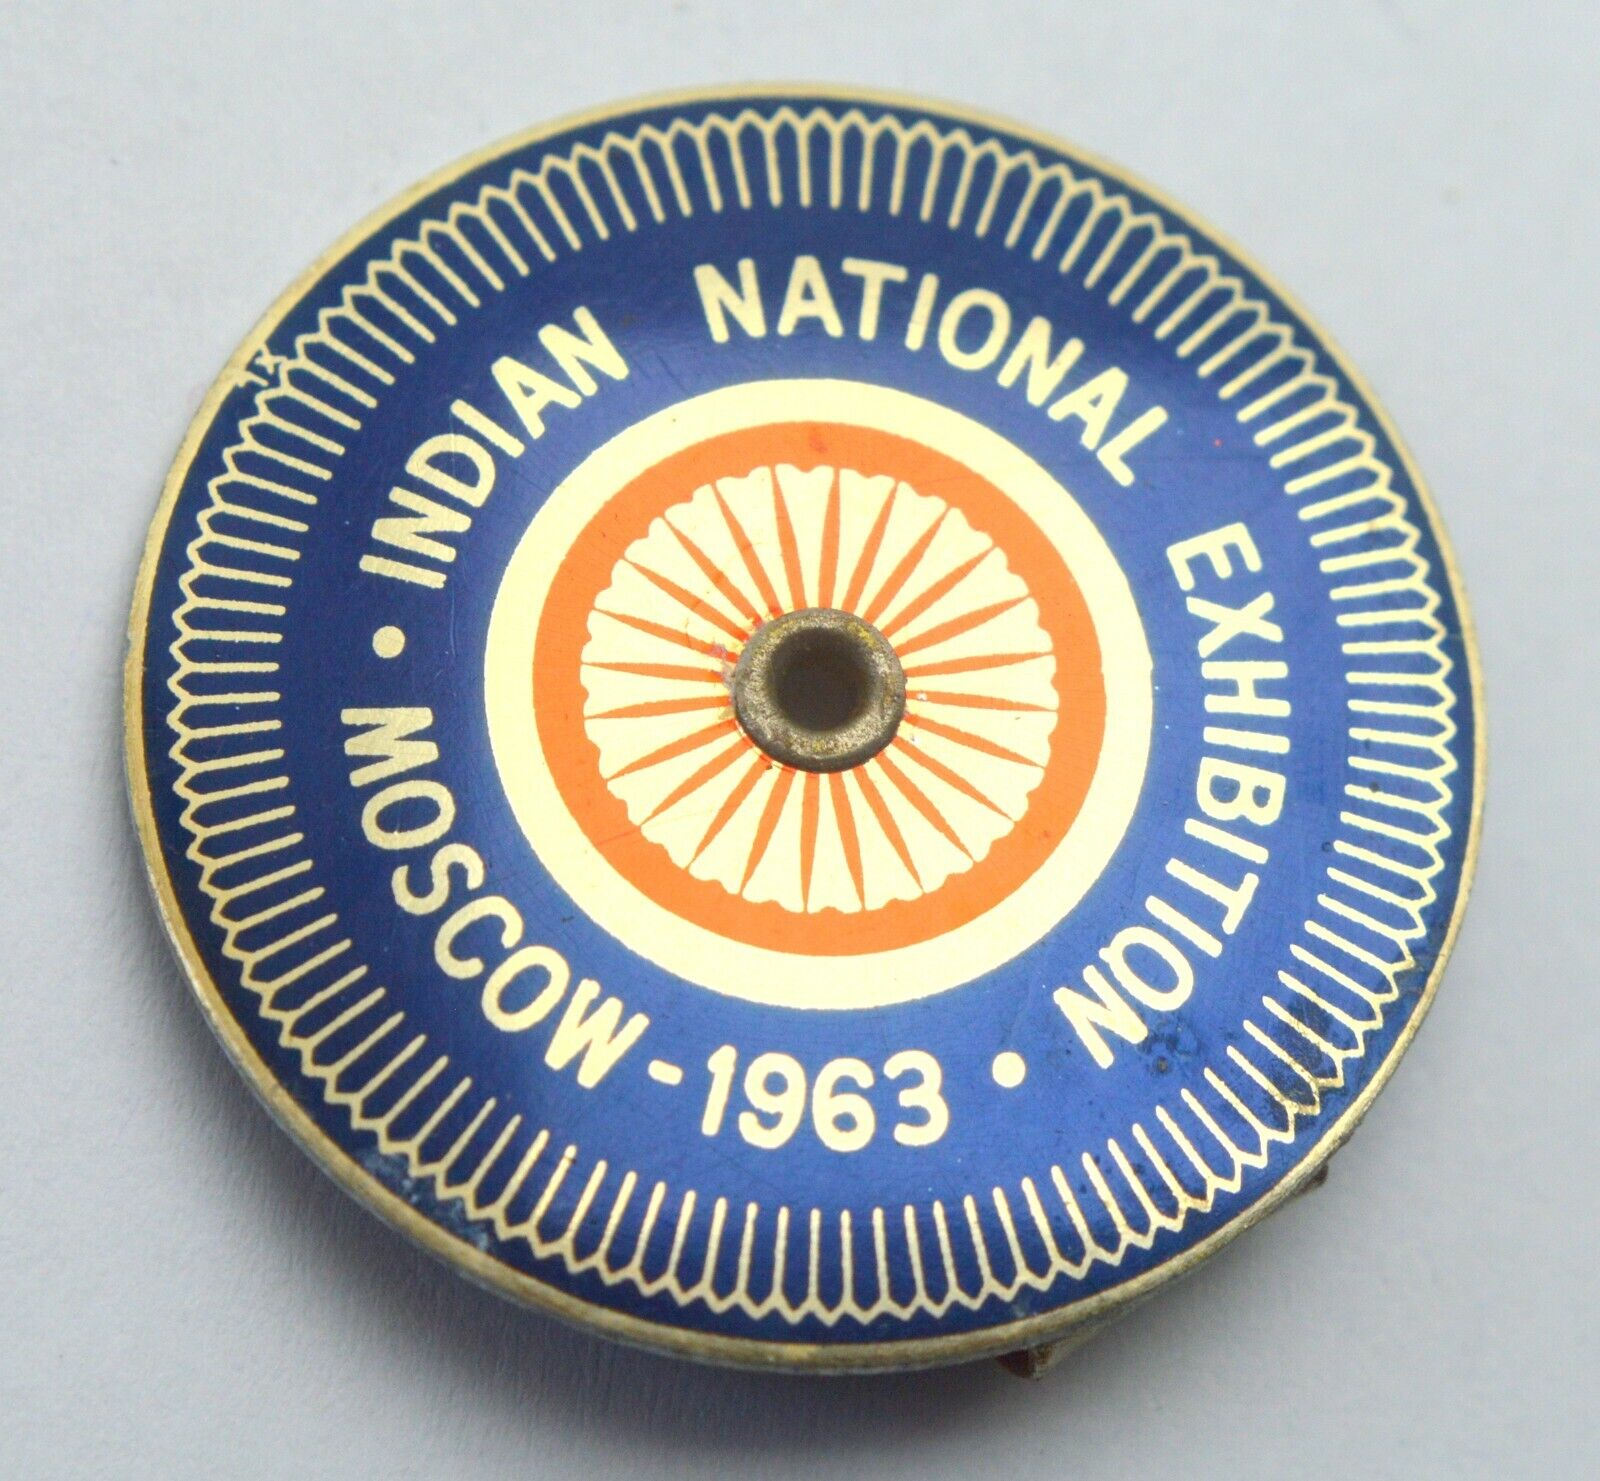 RUSSIA USSR SOVIET INDIAN NATIONAL EXHIBITION MOSCOW 1963 BUTTON PIN BADGE